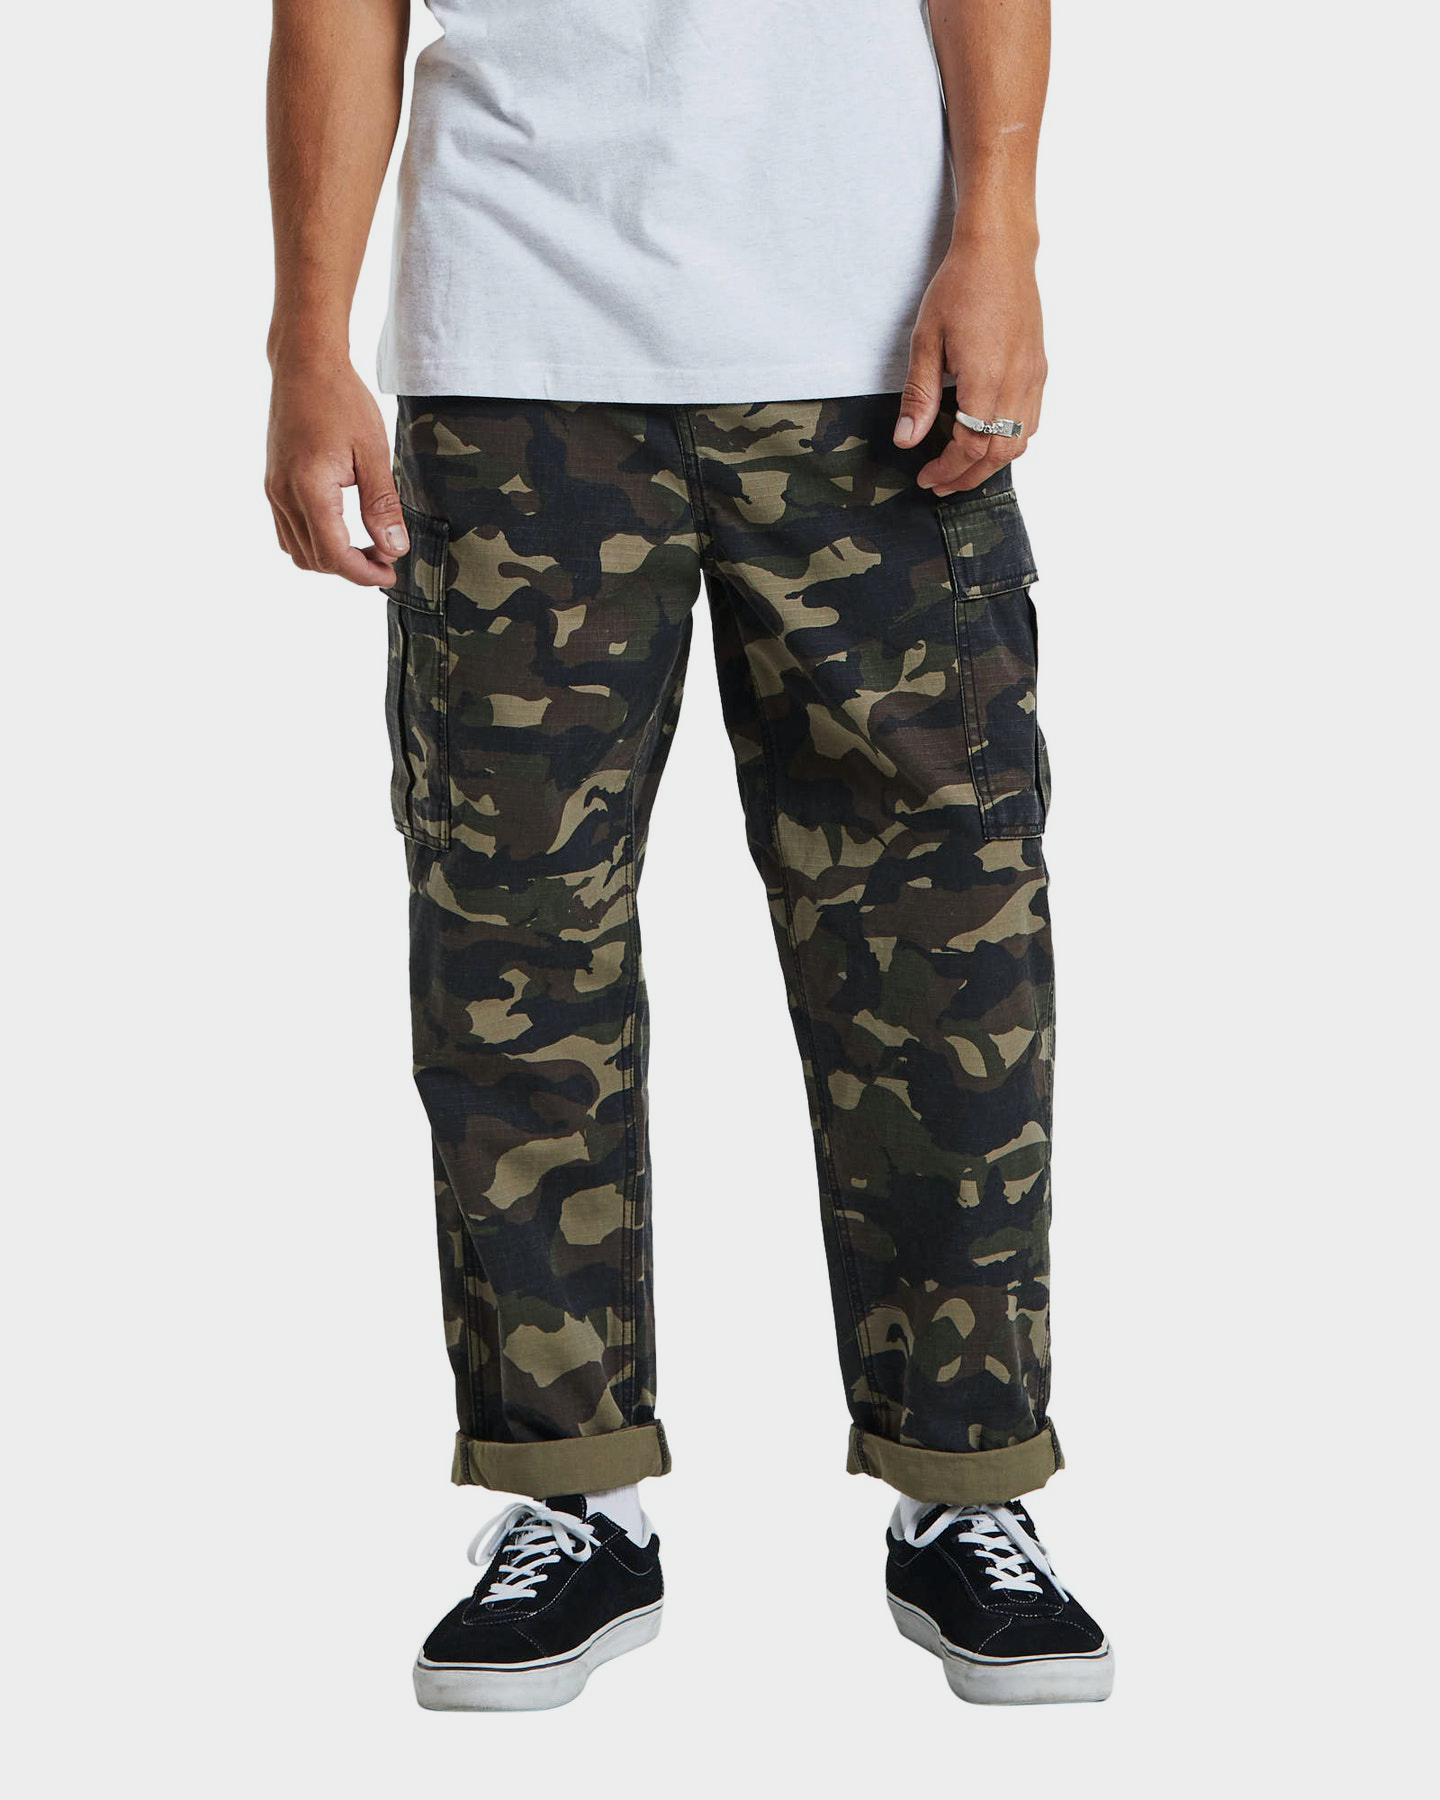 Spencer Project Surplus Ripstop Cargo Pants - Camo | SurfStitch